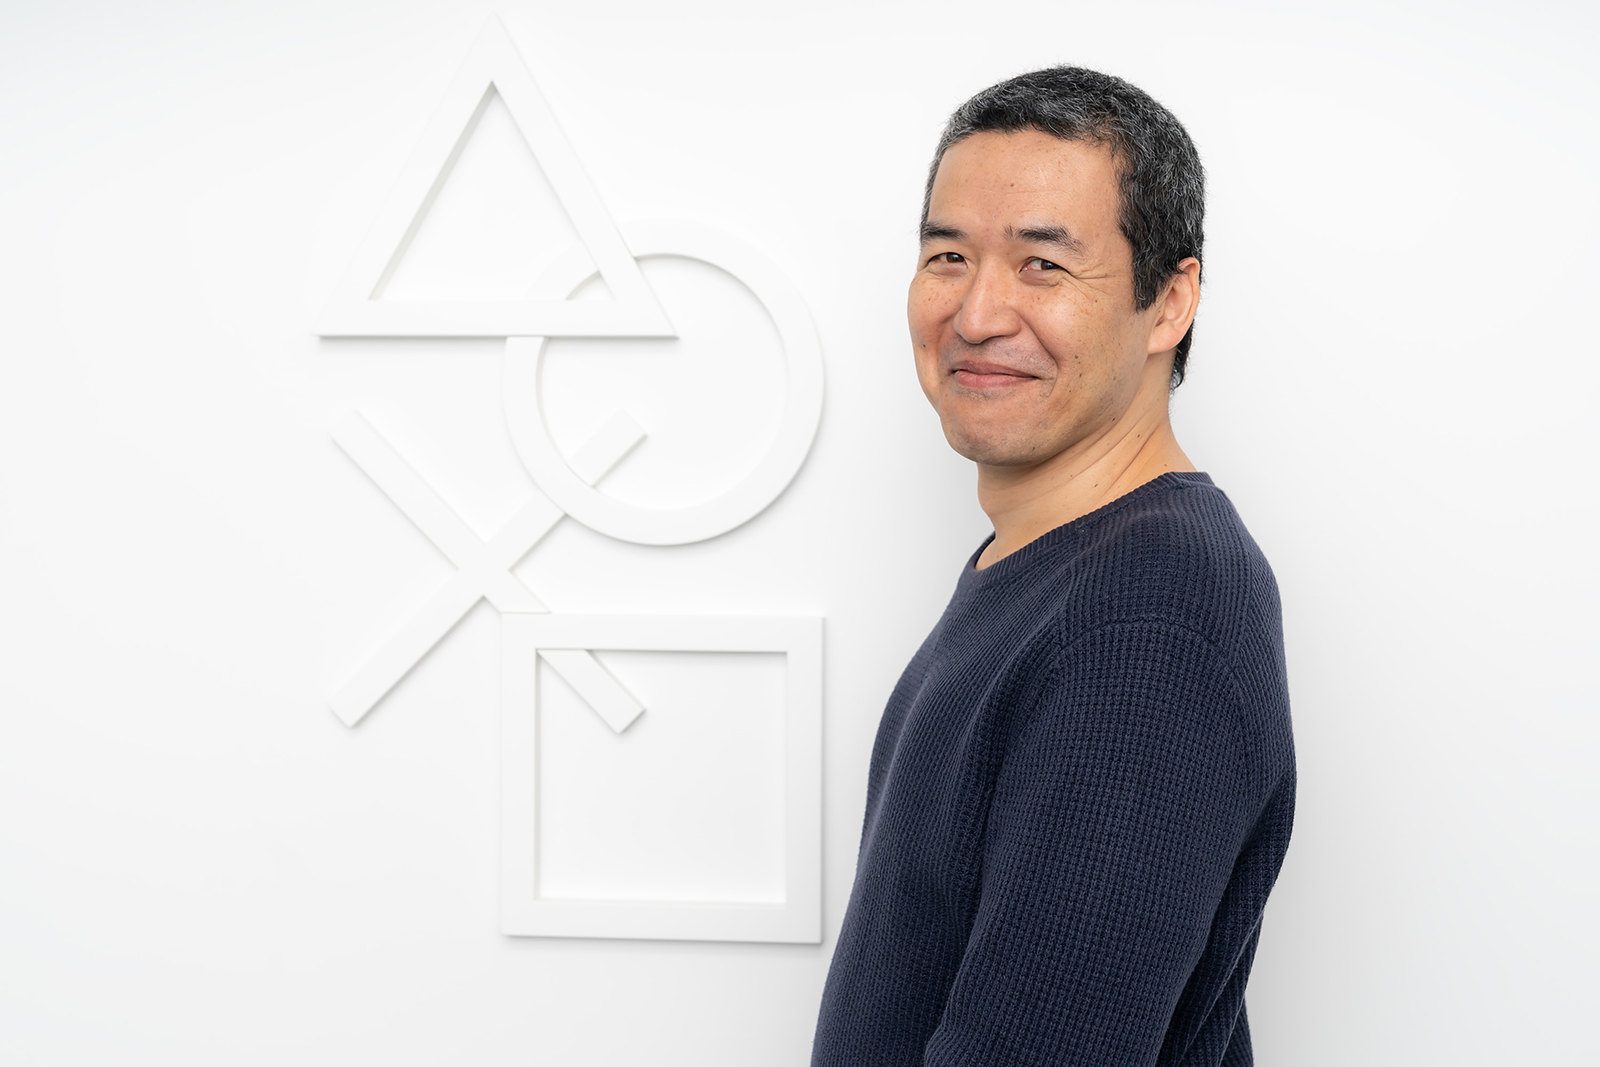 From Prototypes to Future Tech - Sony Interactive Entertainment